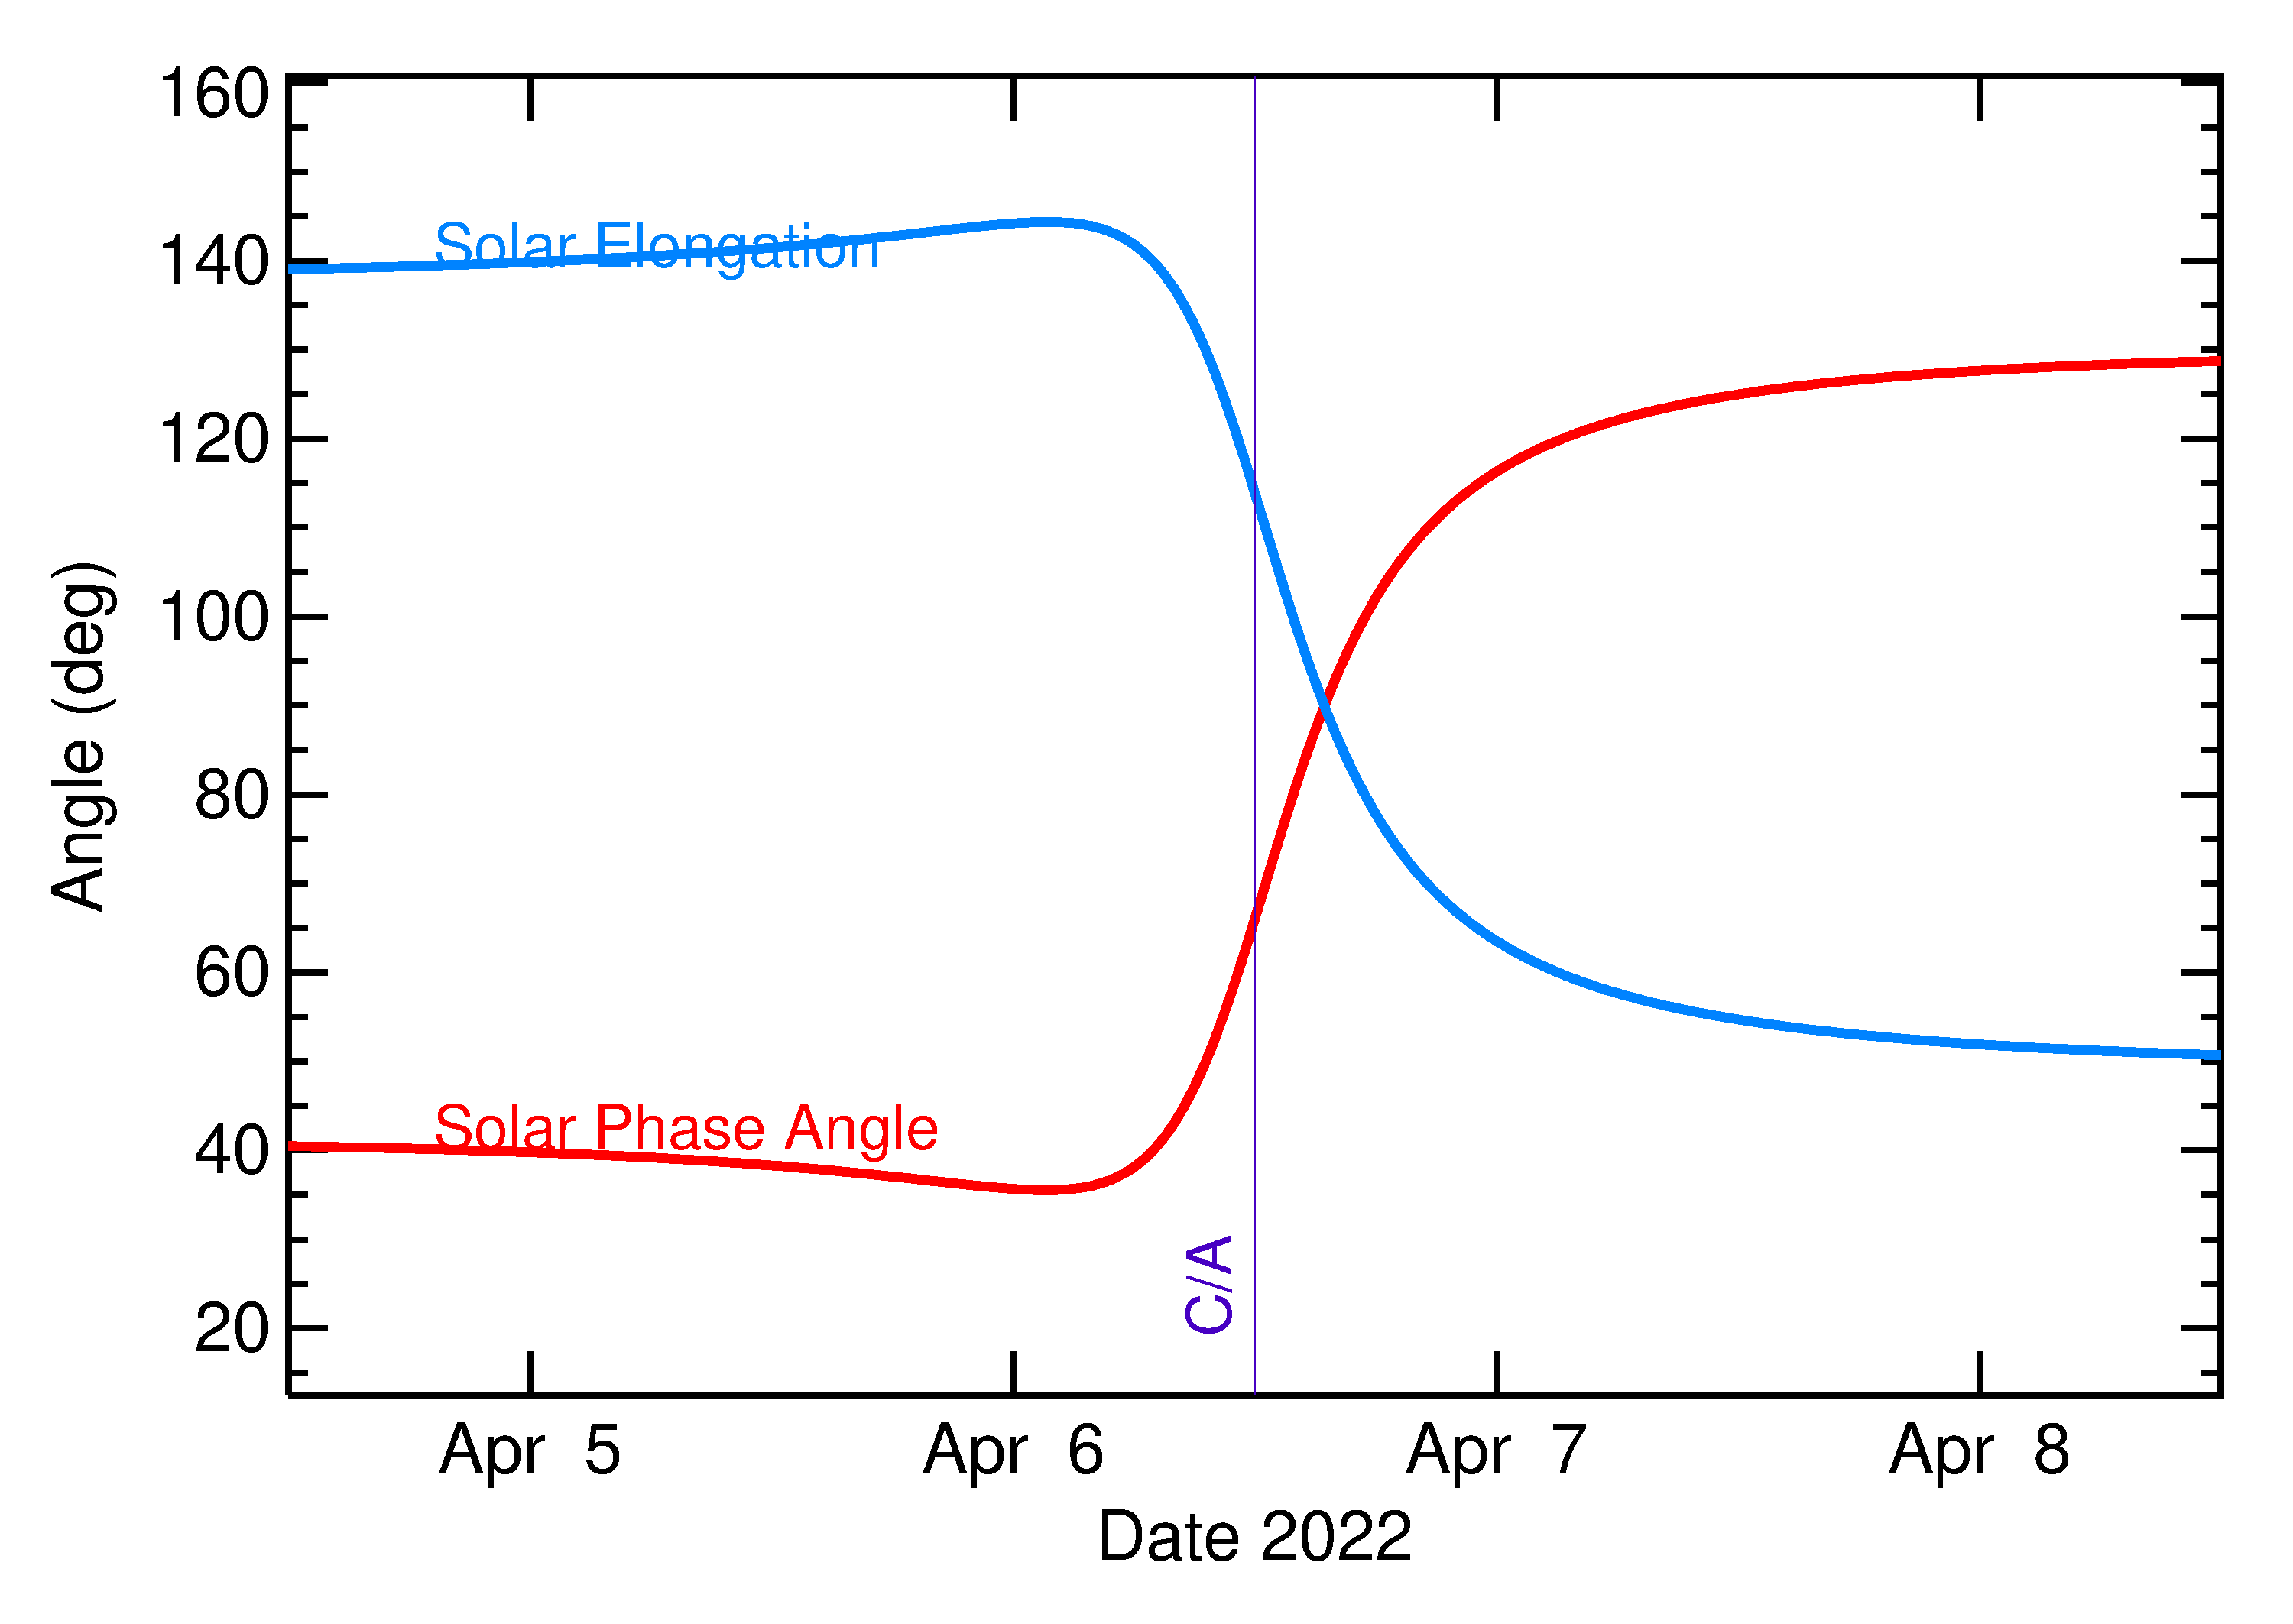 Solar Elongation and Solar Phase Angle of 2022 GZ1 in the days around closest approach